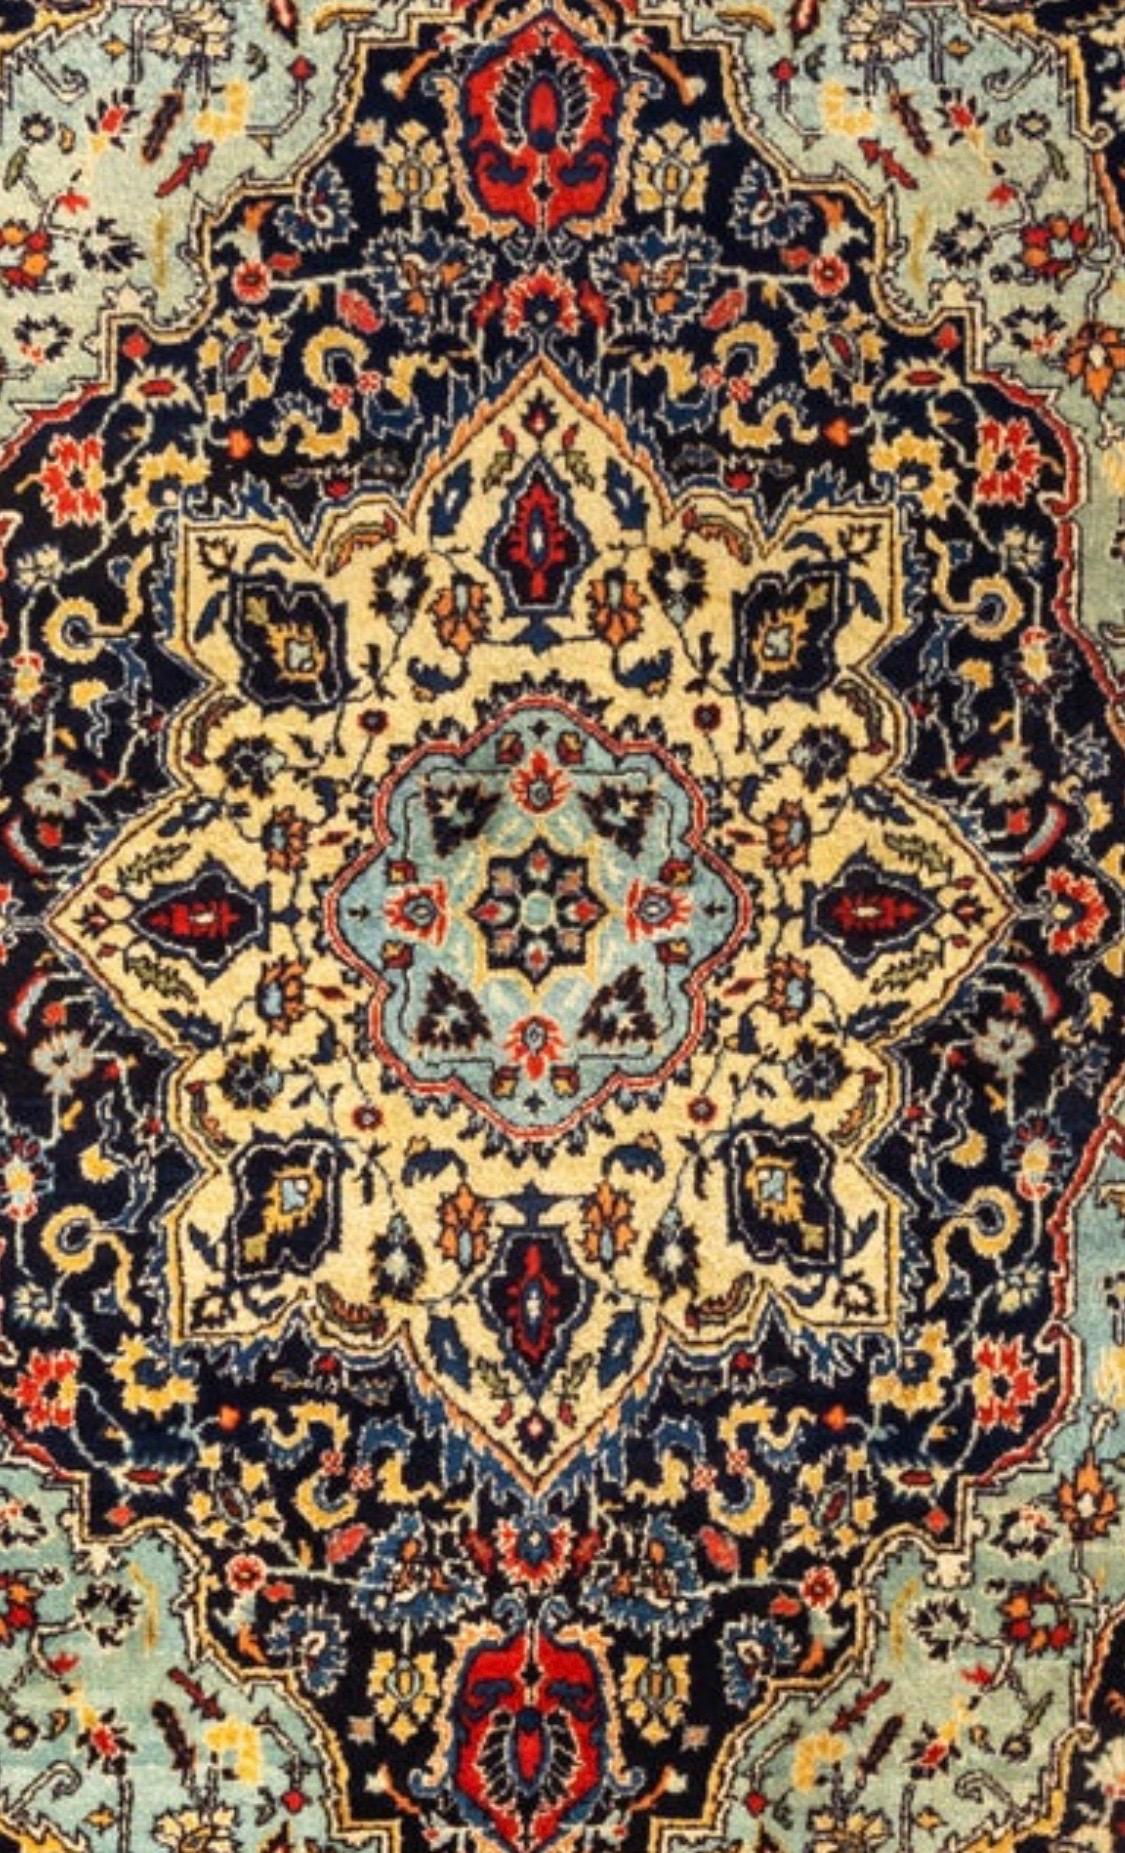 This is a fine example of a lovely antique Farahan Sarouk dating from the 1930s measuring 3.9 x 5.1 ft.

This piece is a pair with Rug #4956 in our collection.

Persian Farahan Sarouk rugs were woven in the village of Sarouk but these carpets